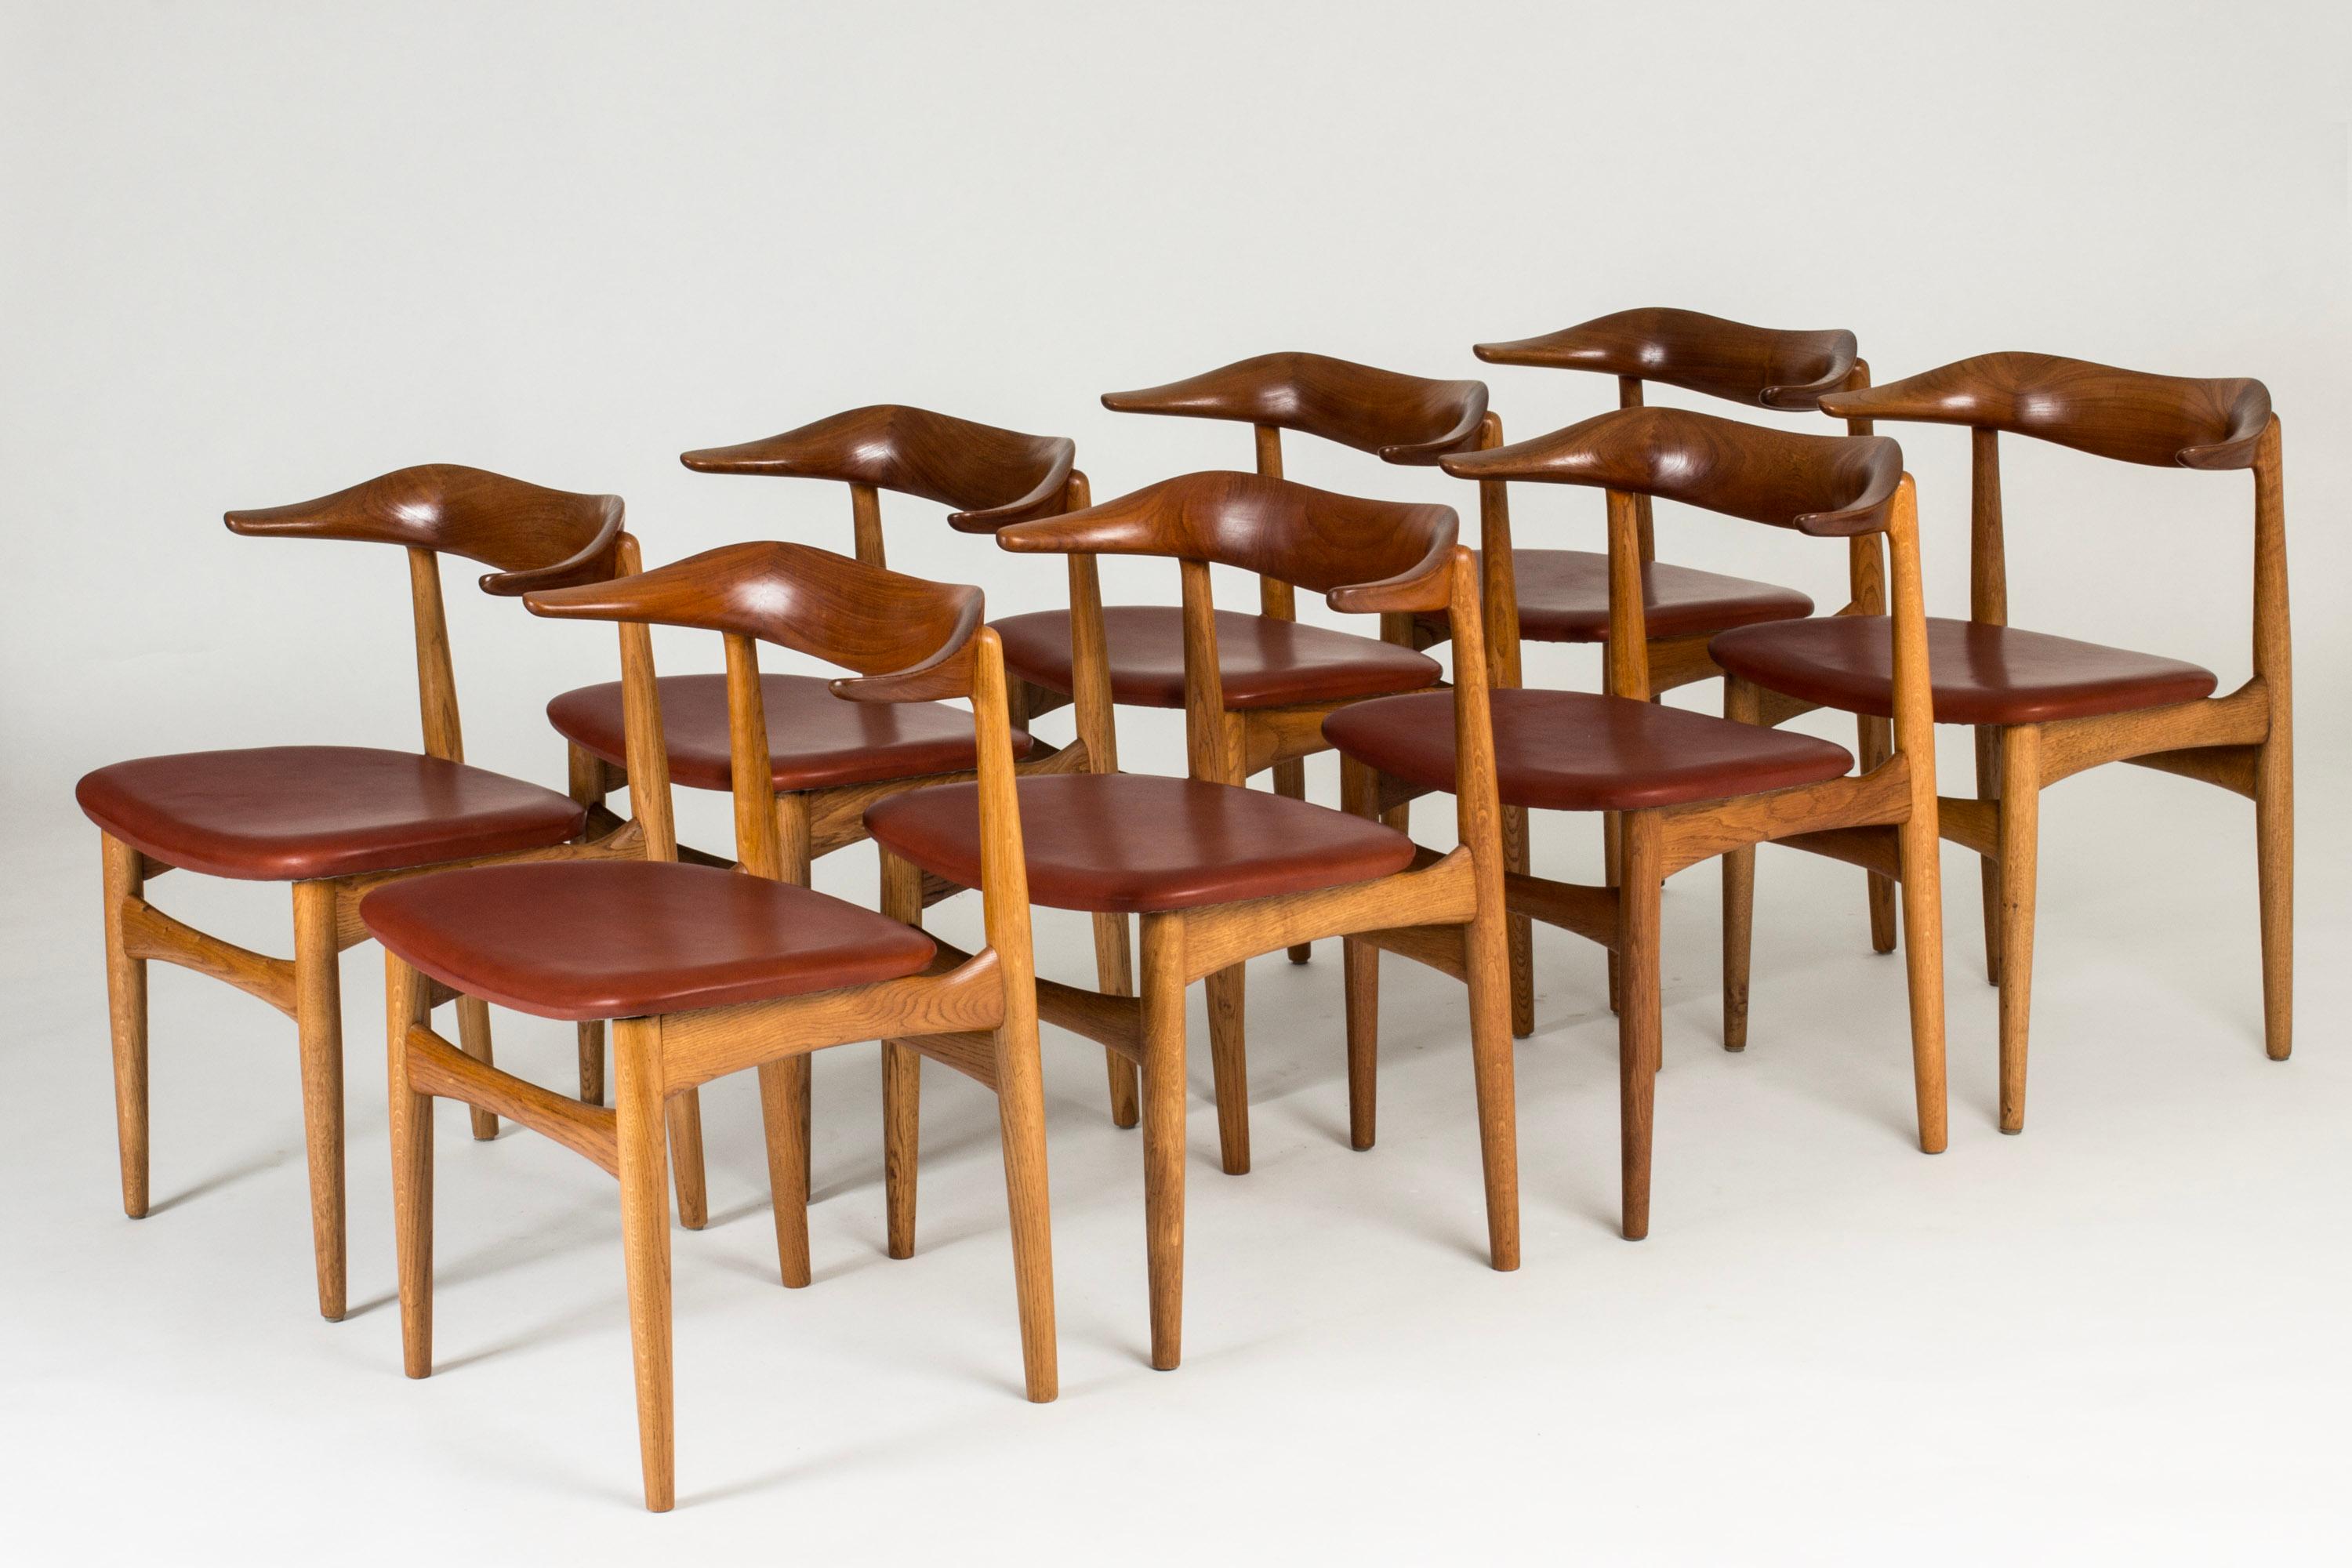 Set of eight “Cowhorn” dining chairs by Knud Færch, made from teak with dark cognac leather seats. Beautifully sculpted backrests in a distinct, undulating form.